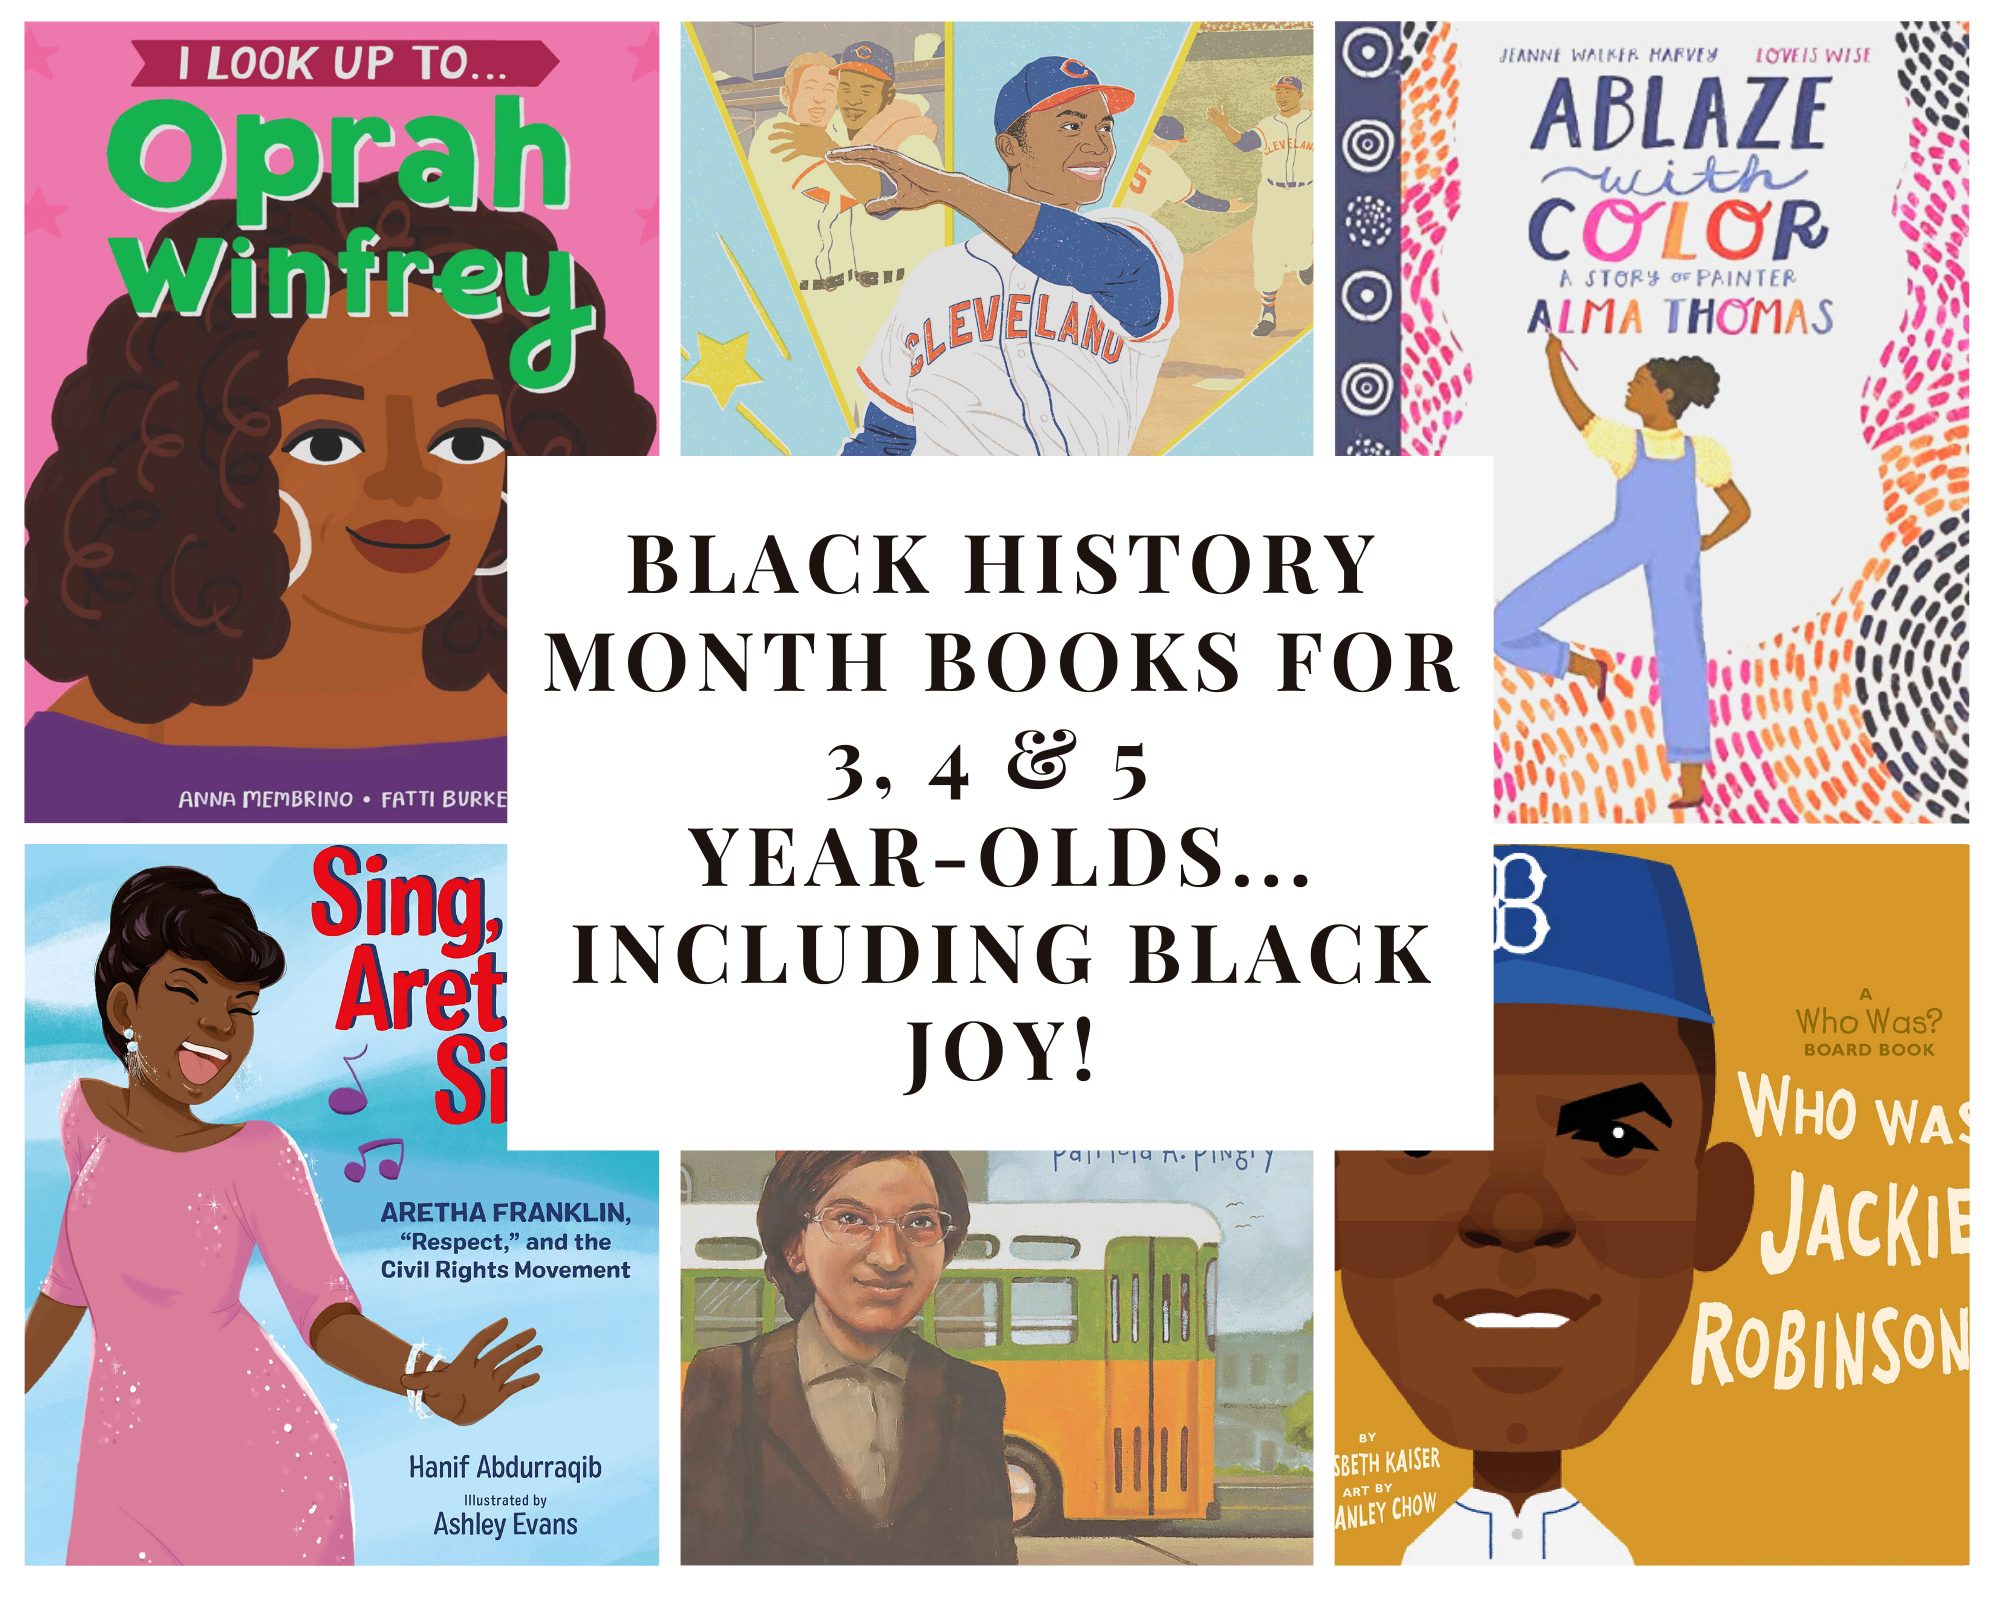 Great for All Juneteenth Teacher Gift African American History BLACK HISTORY Month Illustrated Educational Children's Book